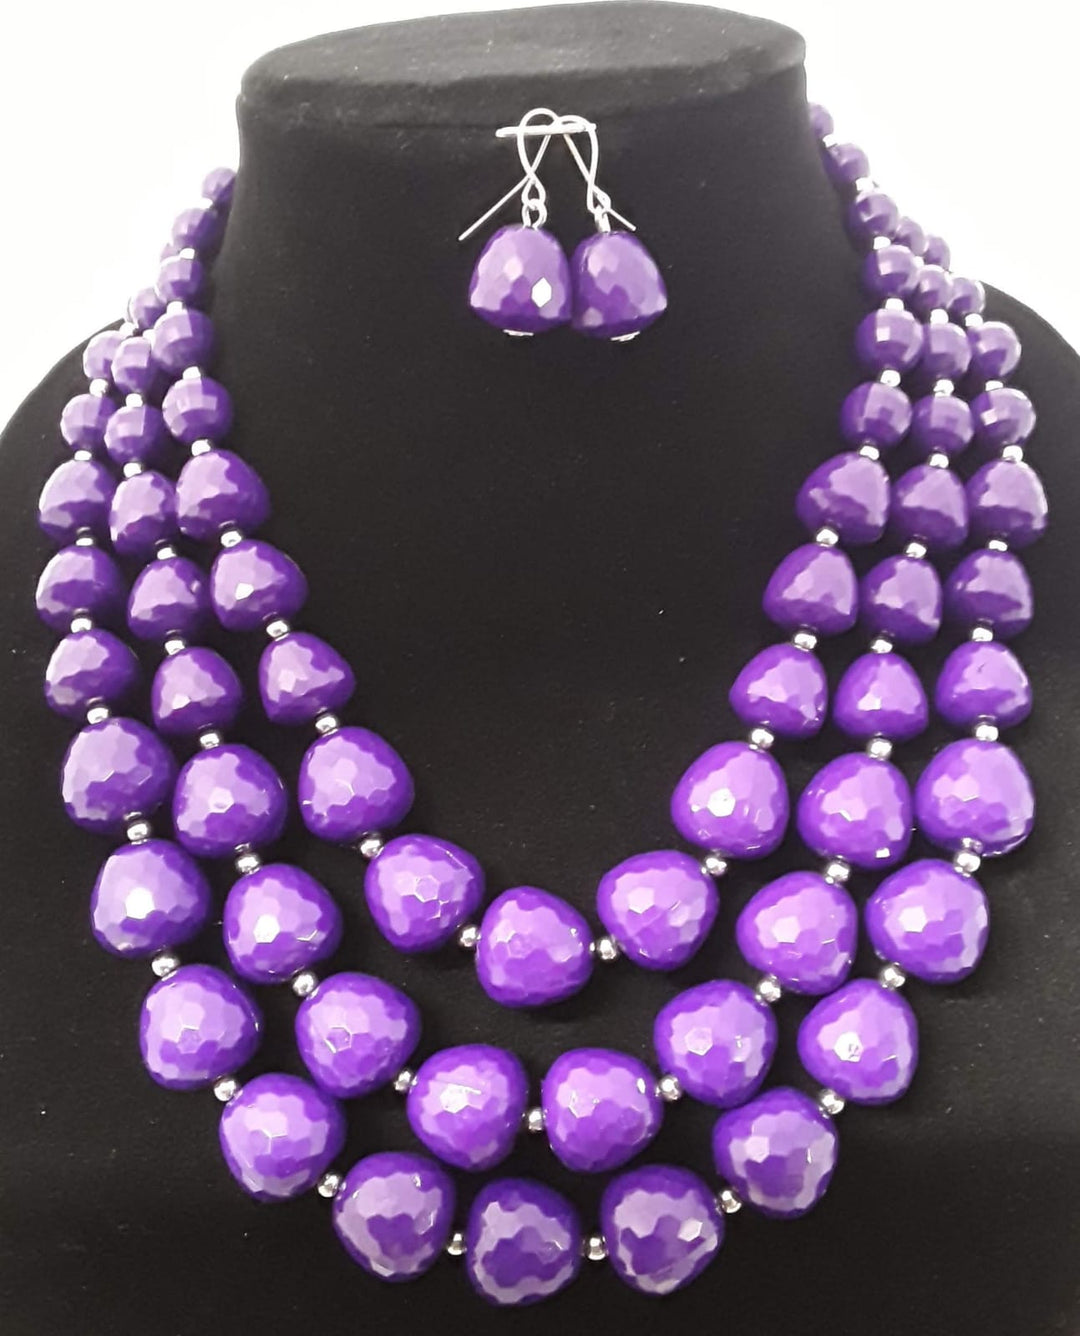 Exciting Purple 2 pc Round Beaded Necklace Set